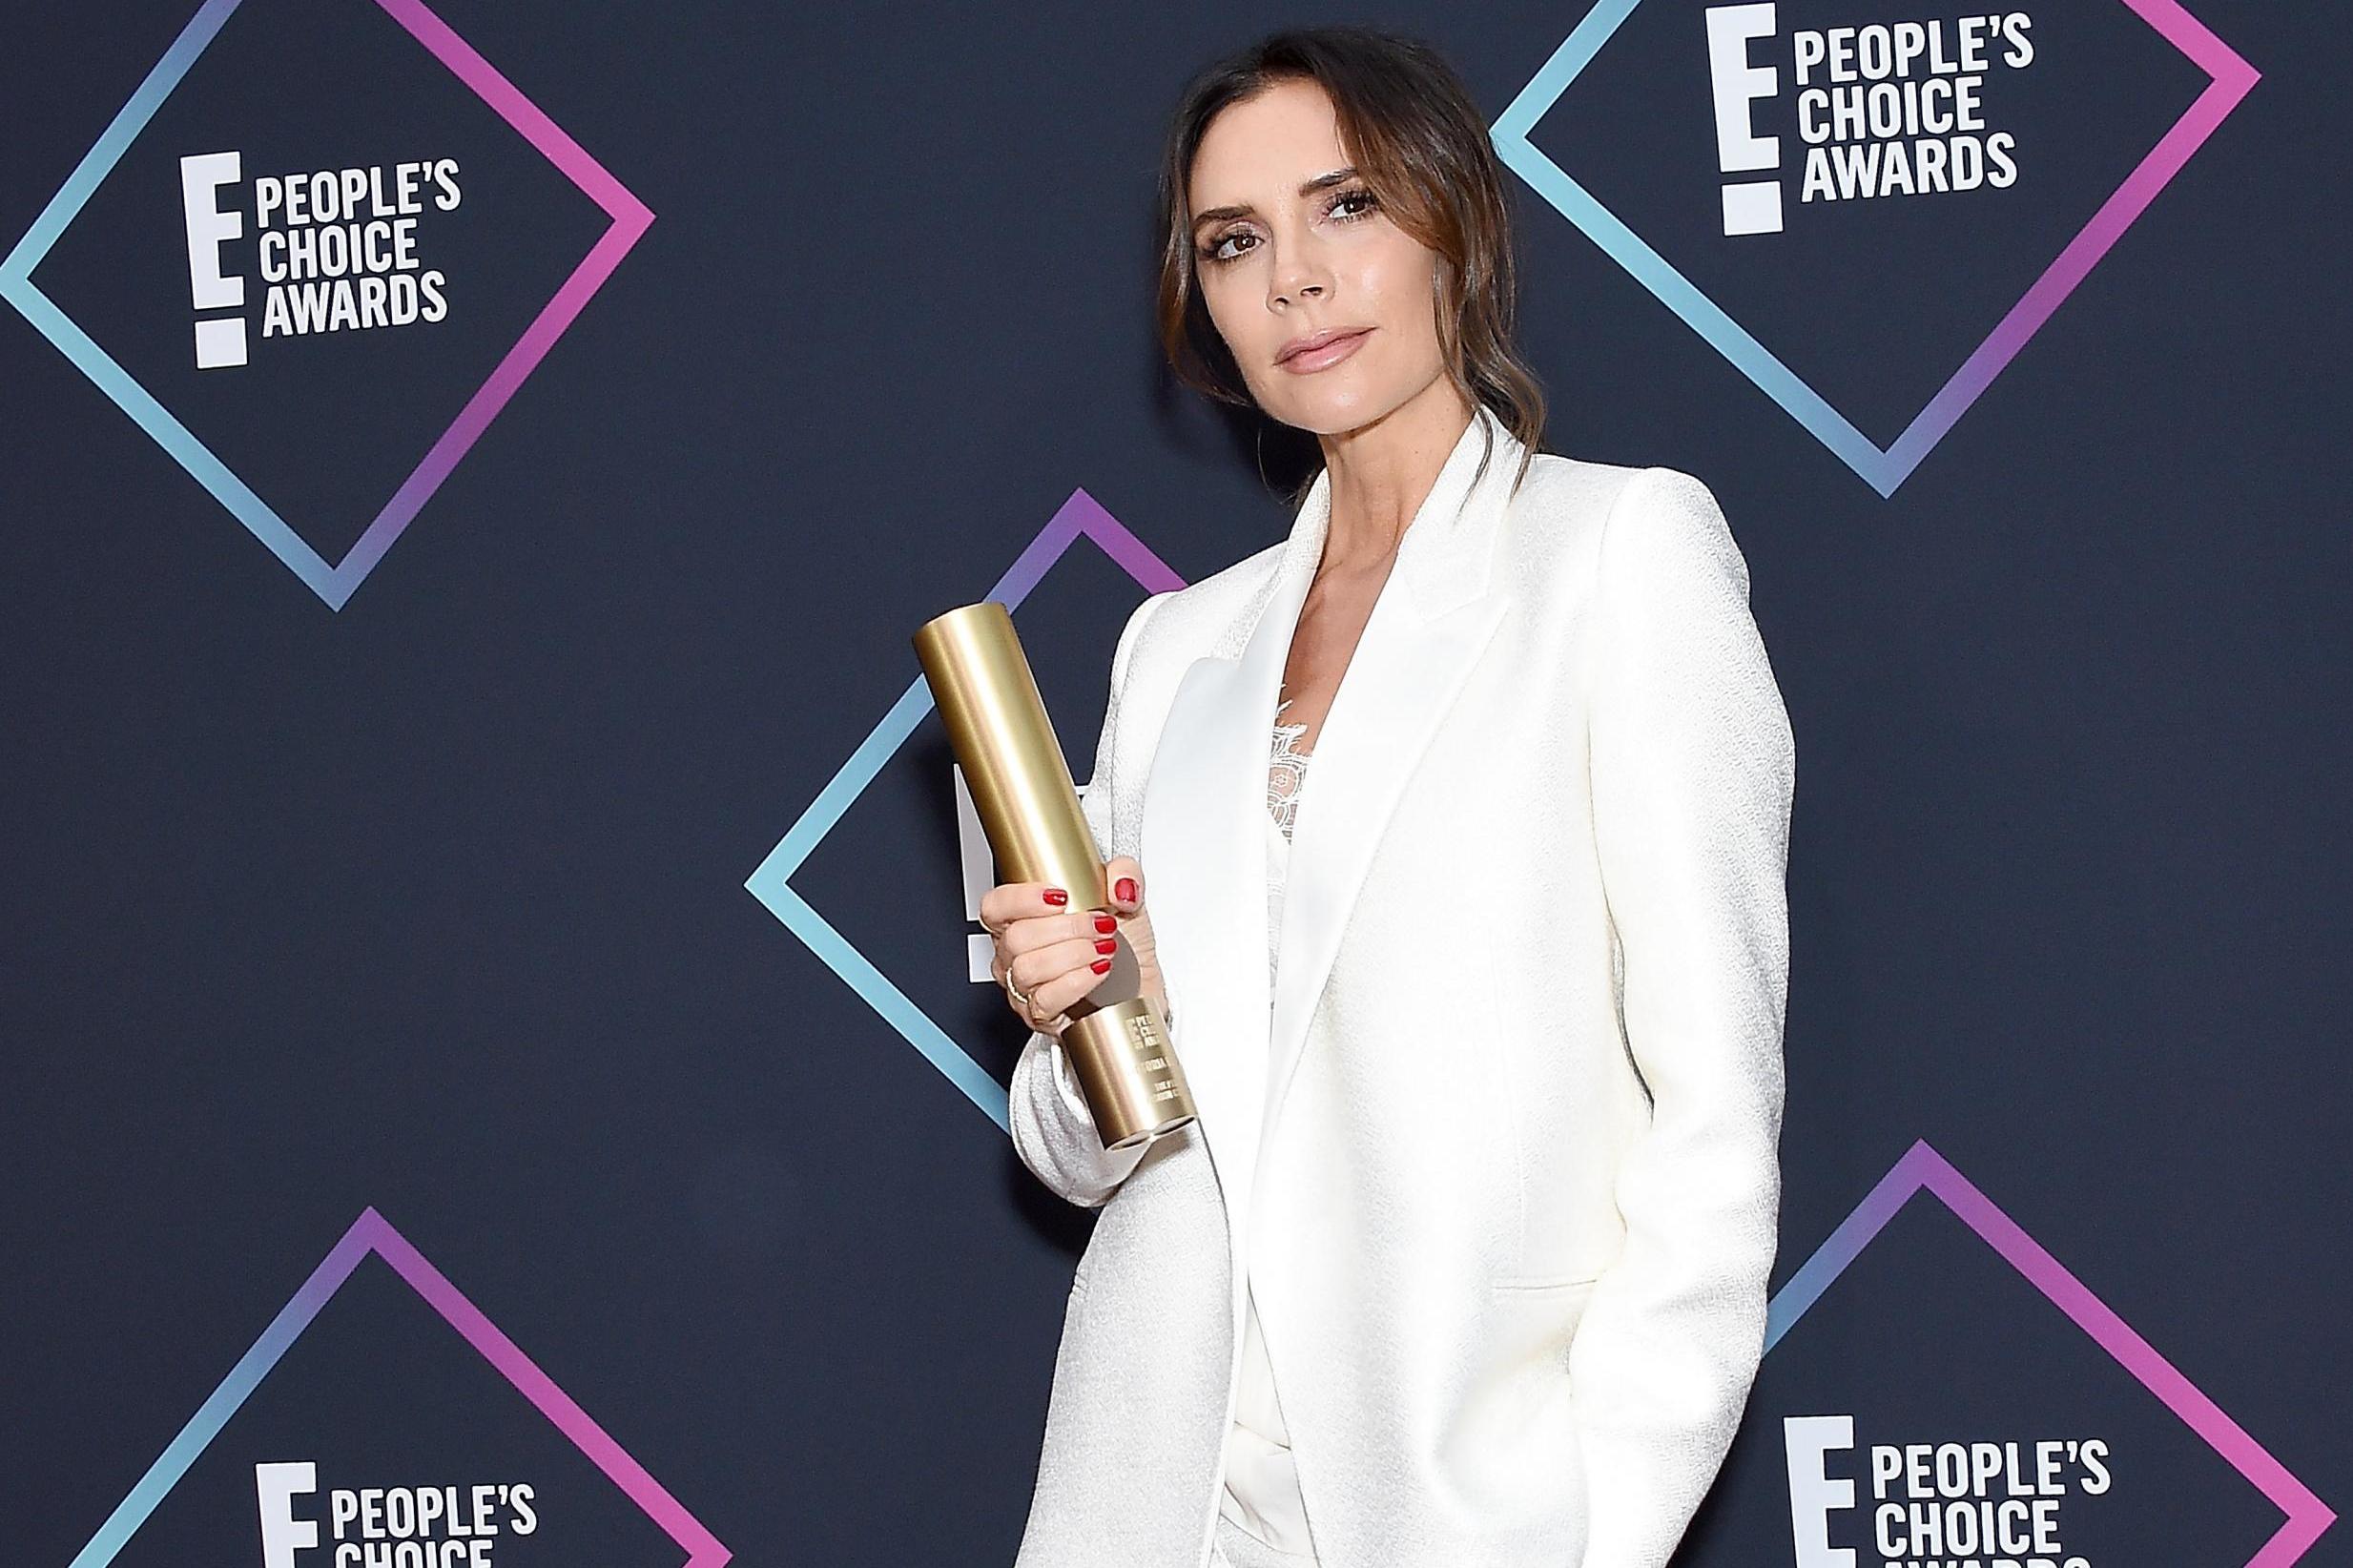 Victoria Beckham was named Fashion Icon at the People's Choice Awards